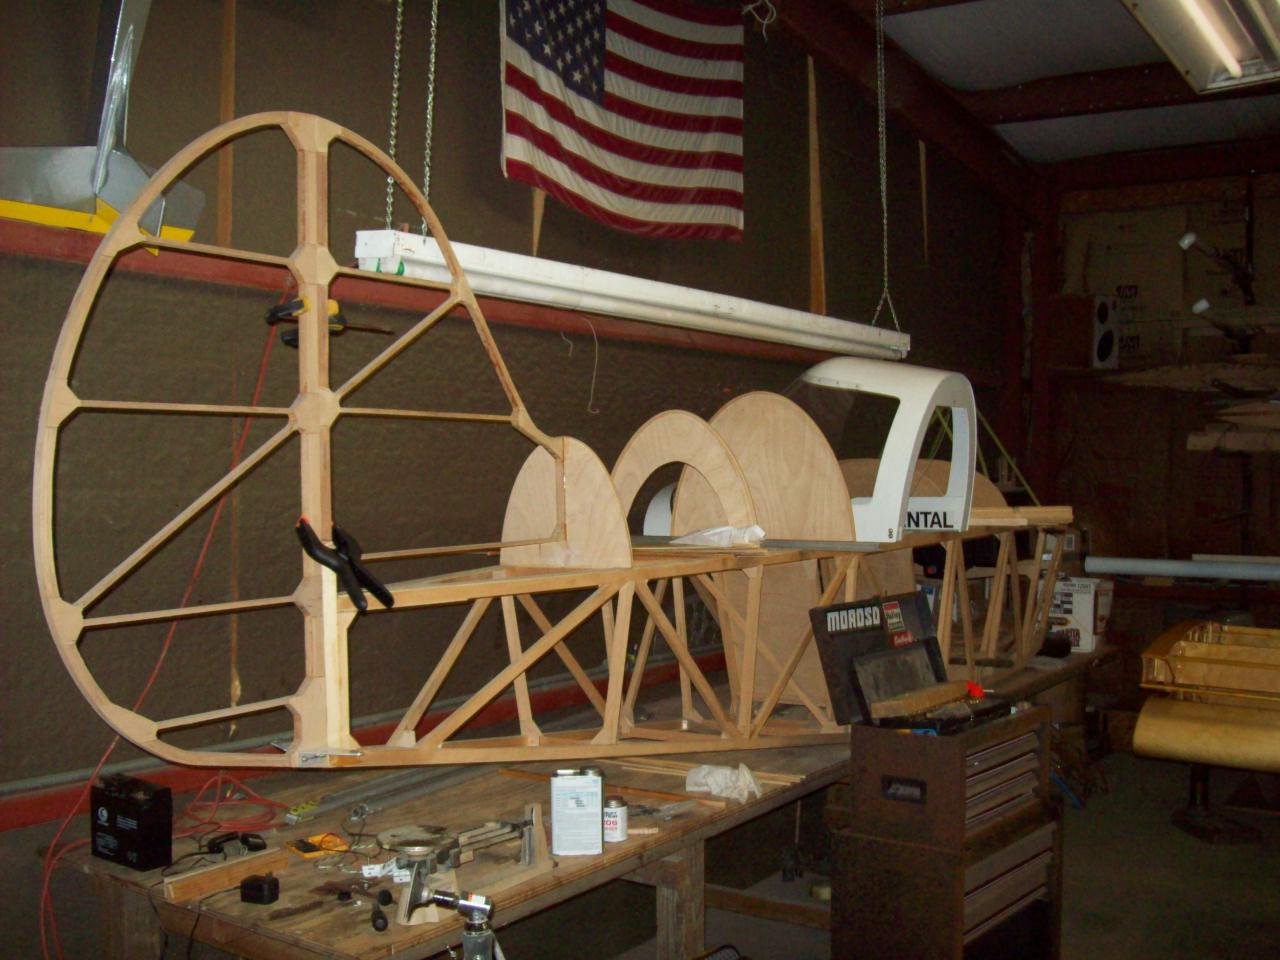 My bud Wayne's wood version of a Pitts S2E